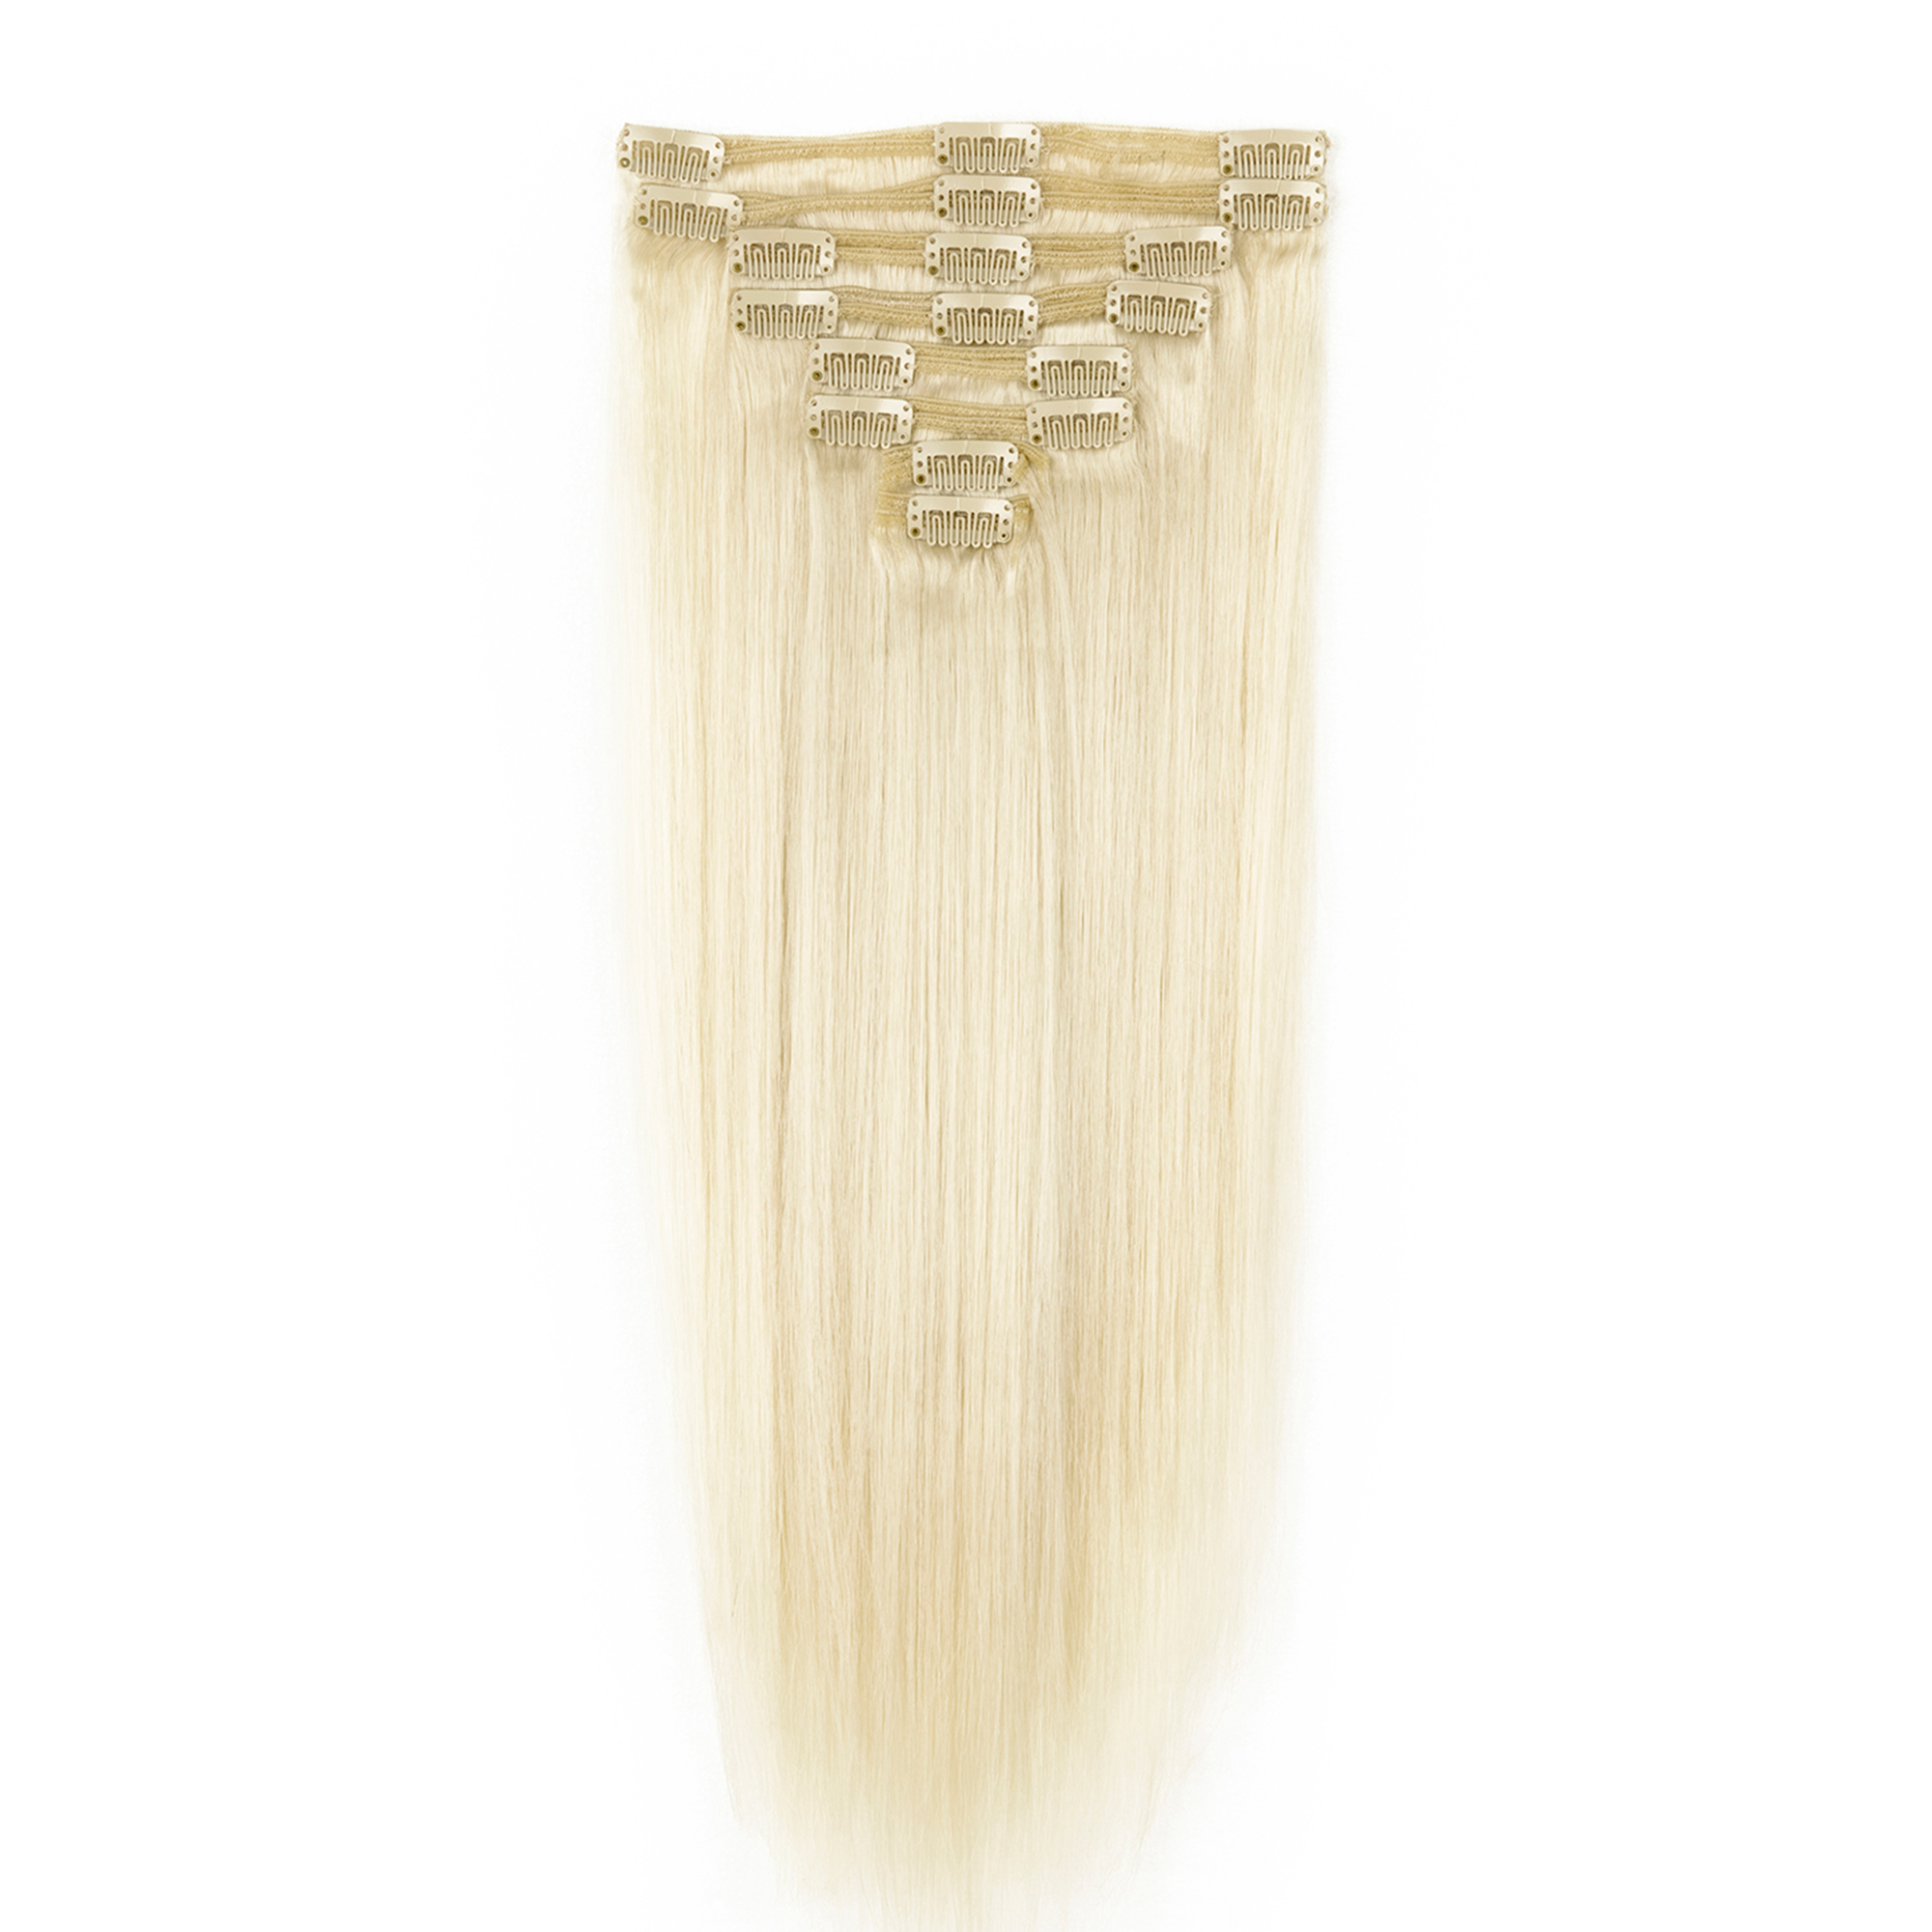 LELINTA 8pcs 14" 16" 18" 20" 22" Clip in Hair Extensions Remy Human Hair Women Silky Straight Human Hair Extensions 18 Clips - image 3 of 8